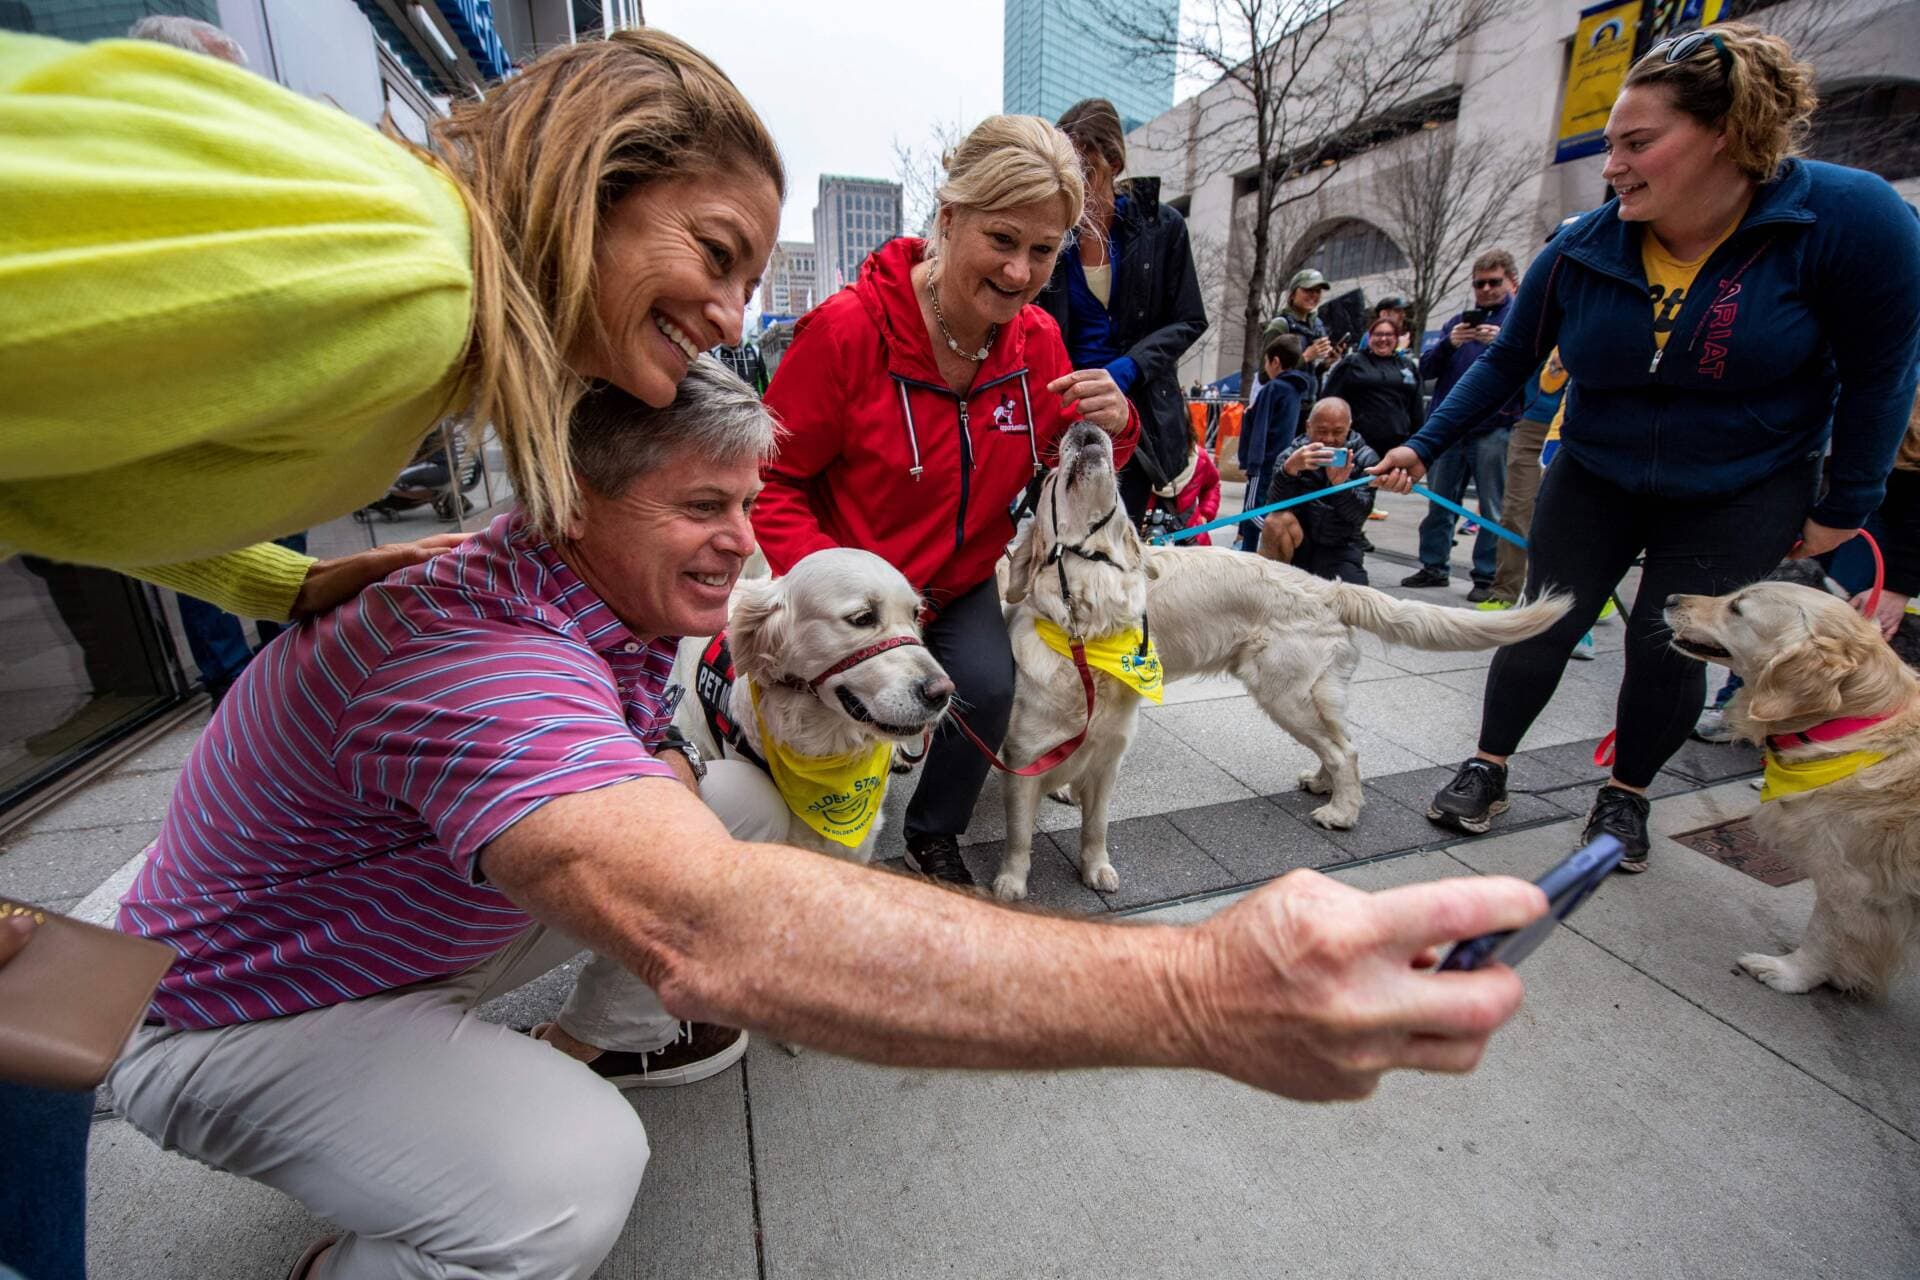 People take photos with dozens of golden retrievers, and their owners, as they stand by the Boston Marathon finish line in Boston, Massachusetts, on April 16, 2023. (Joseph Prezioso/AFP via Getty Images)